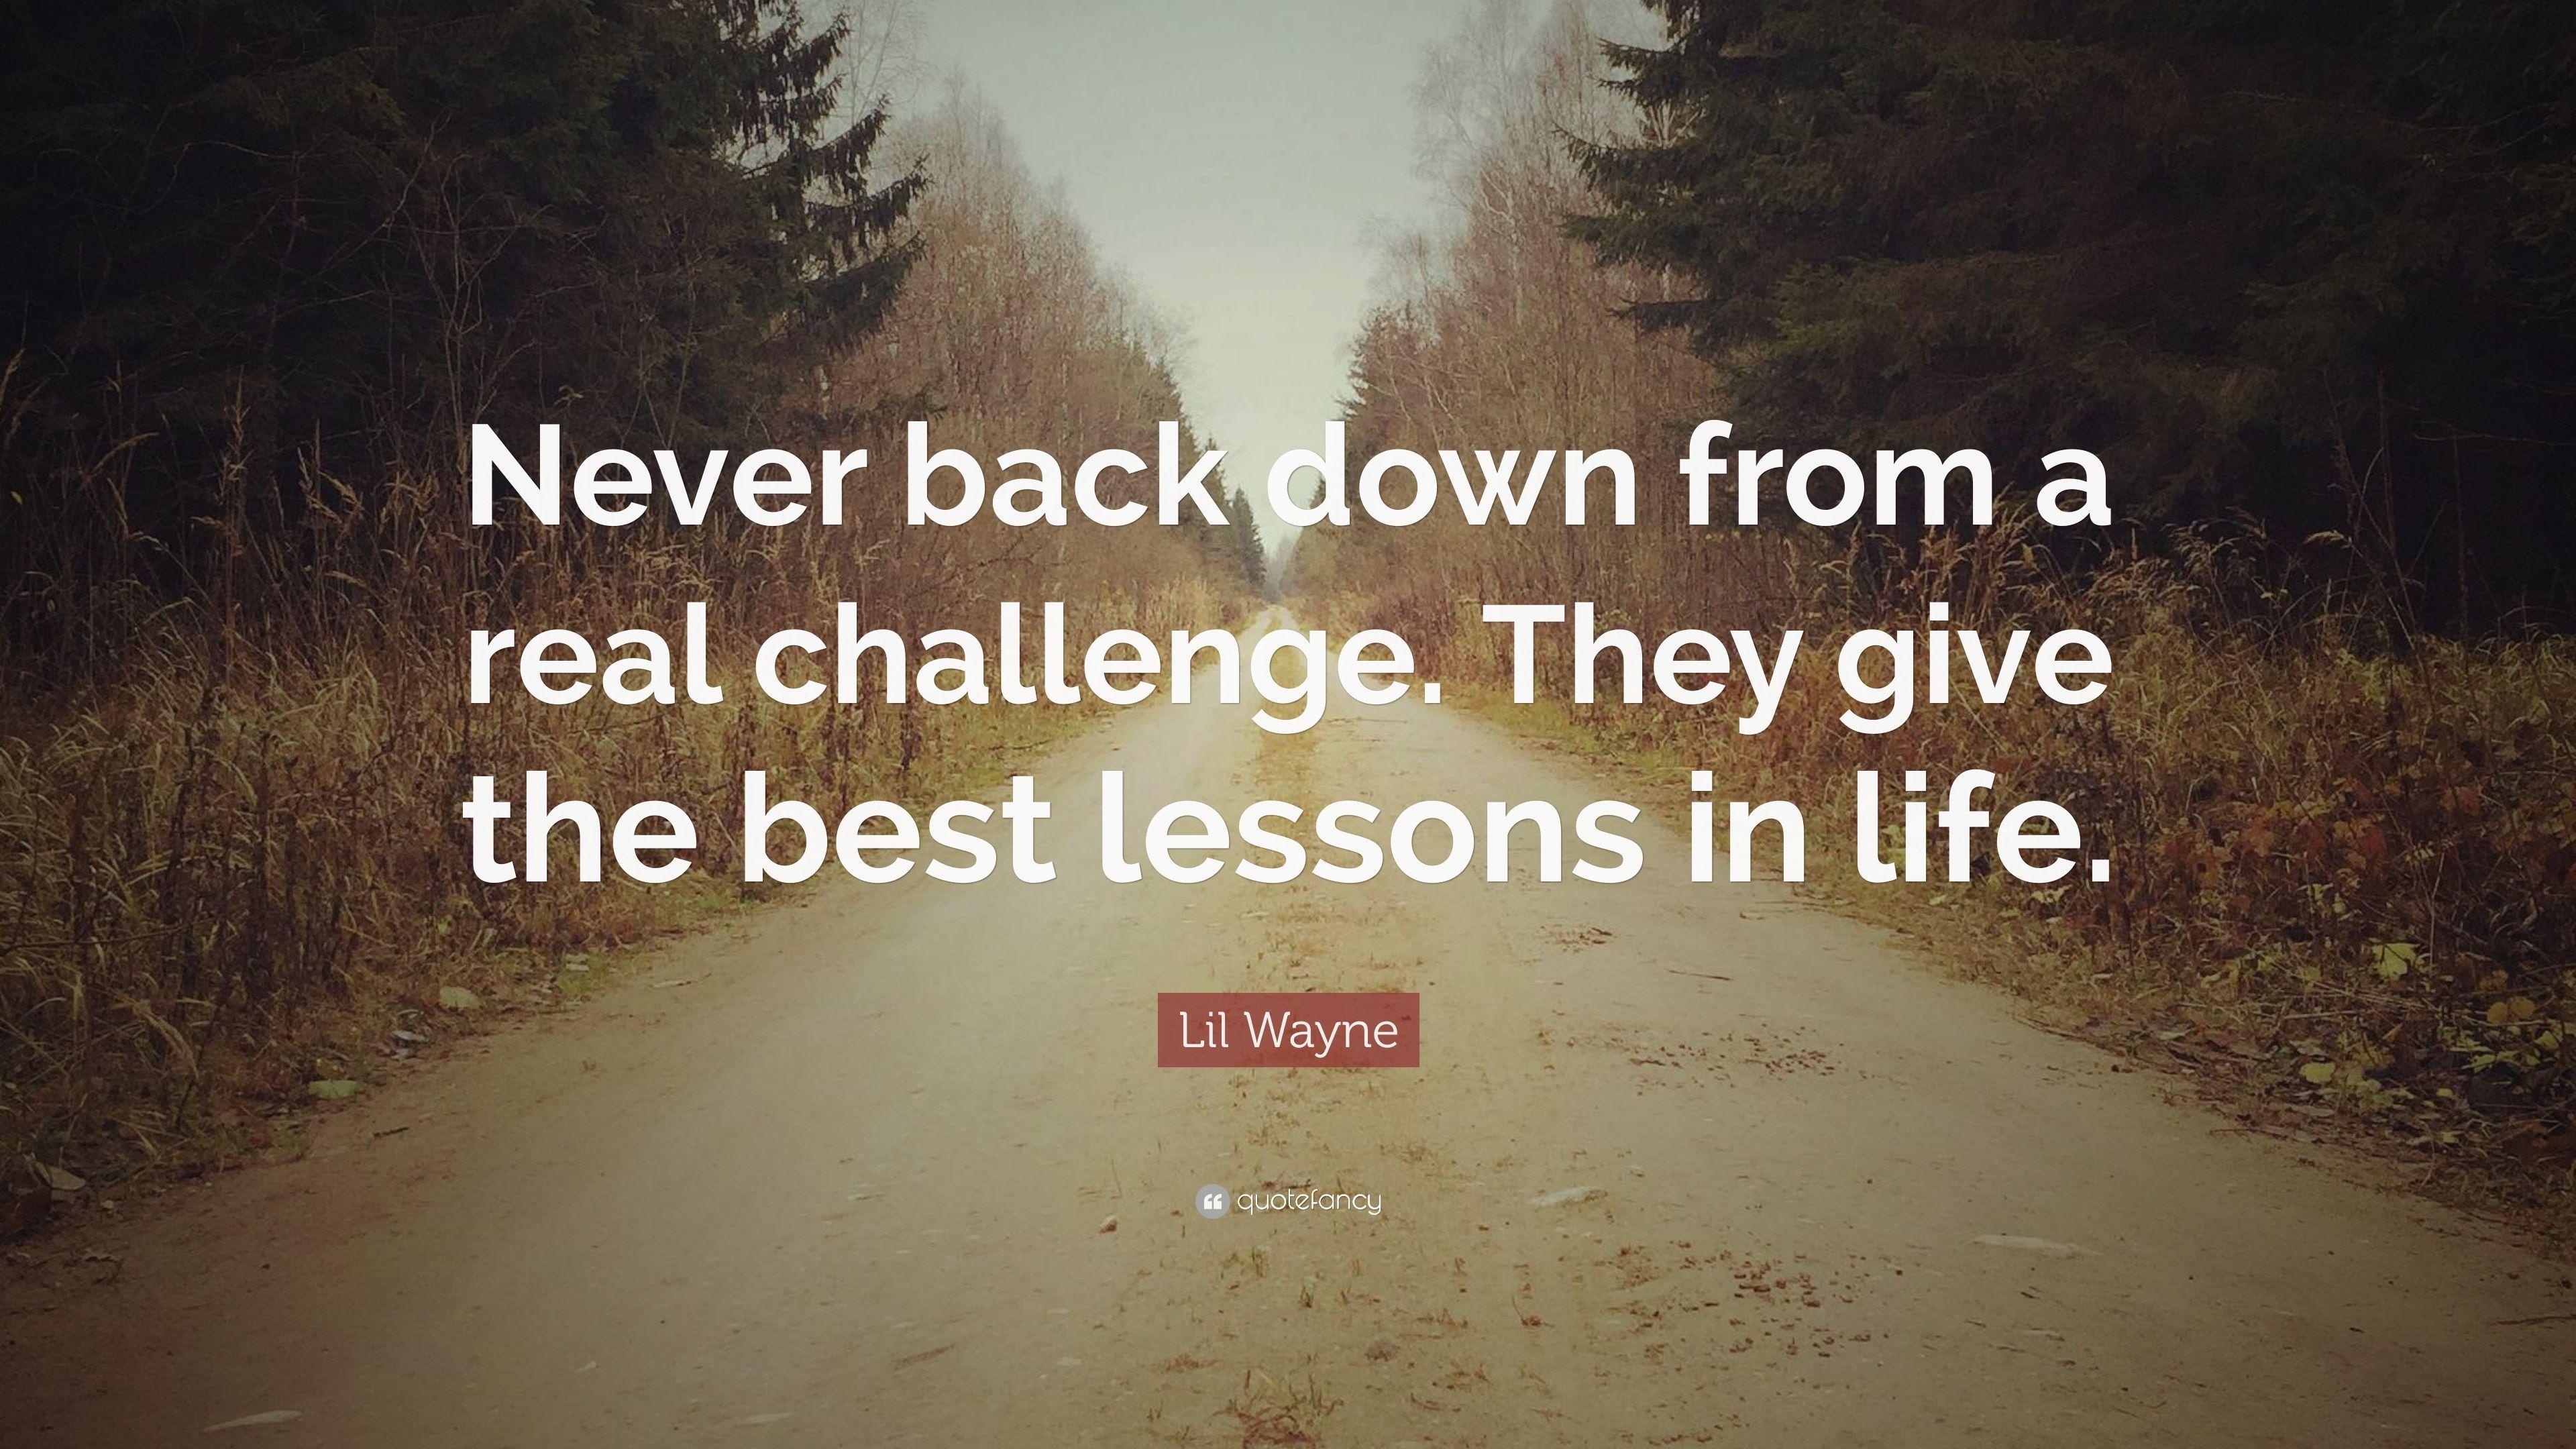 Lil Wayne Quote: “Never back down from a real challenge. They give